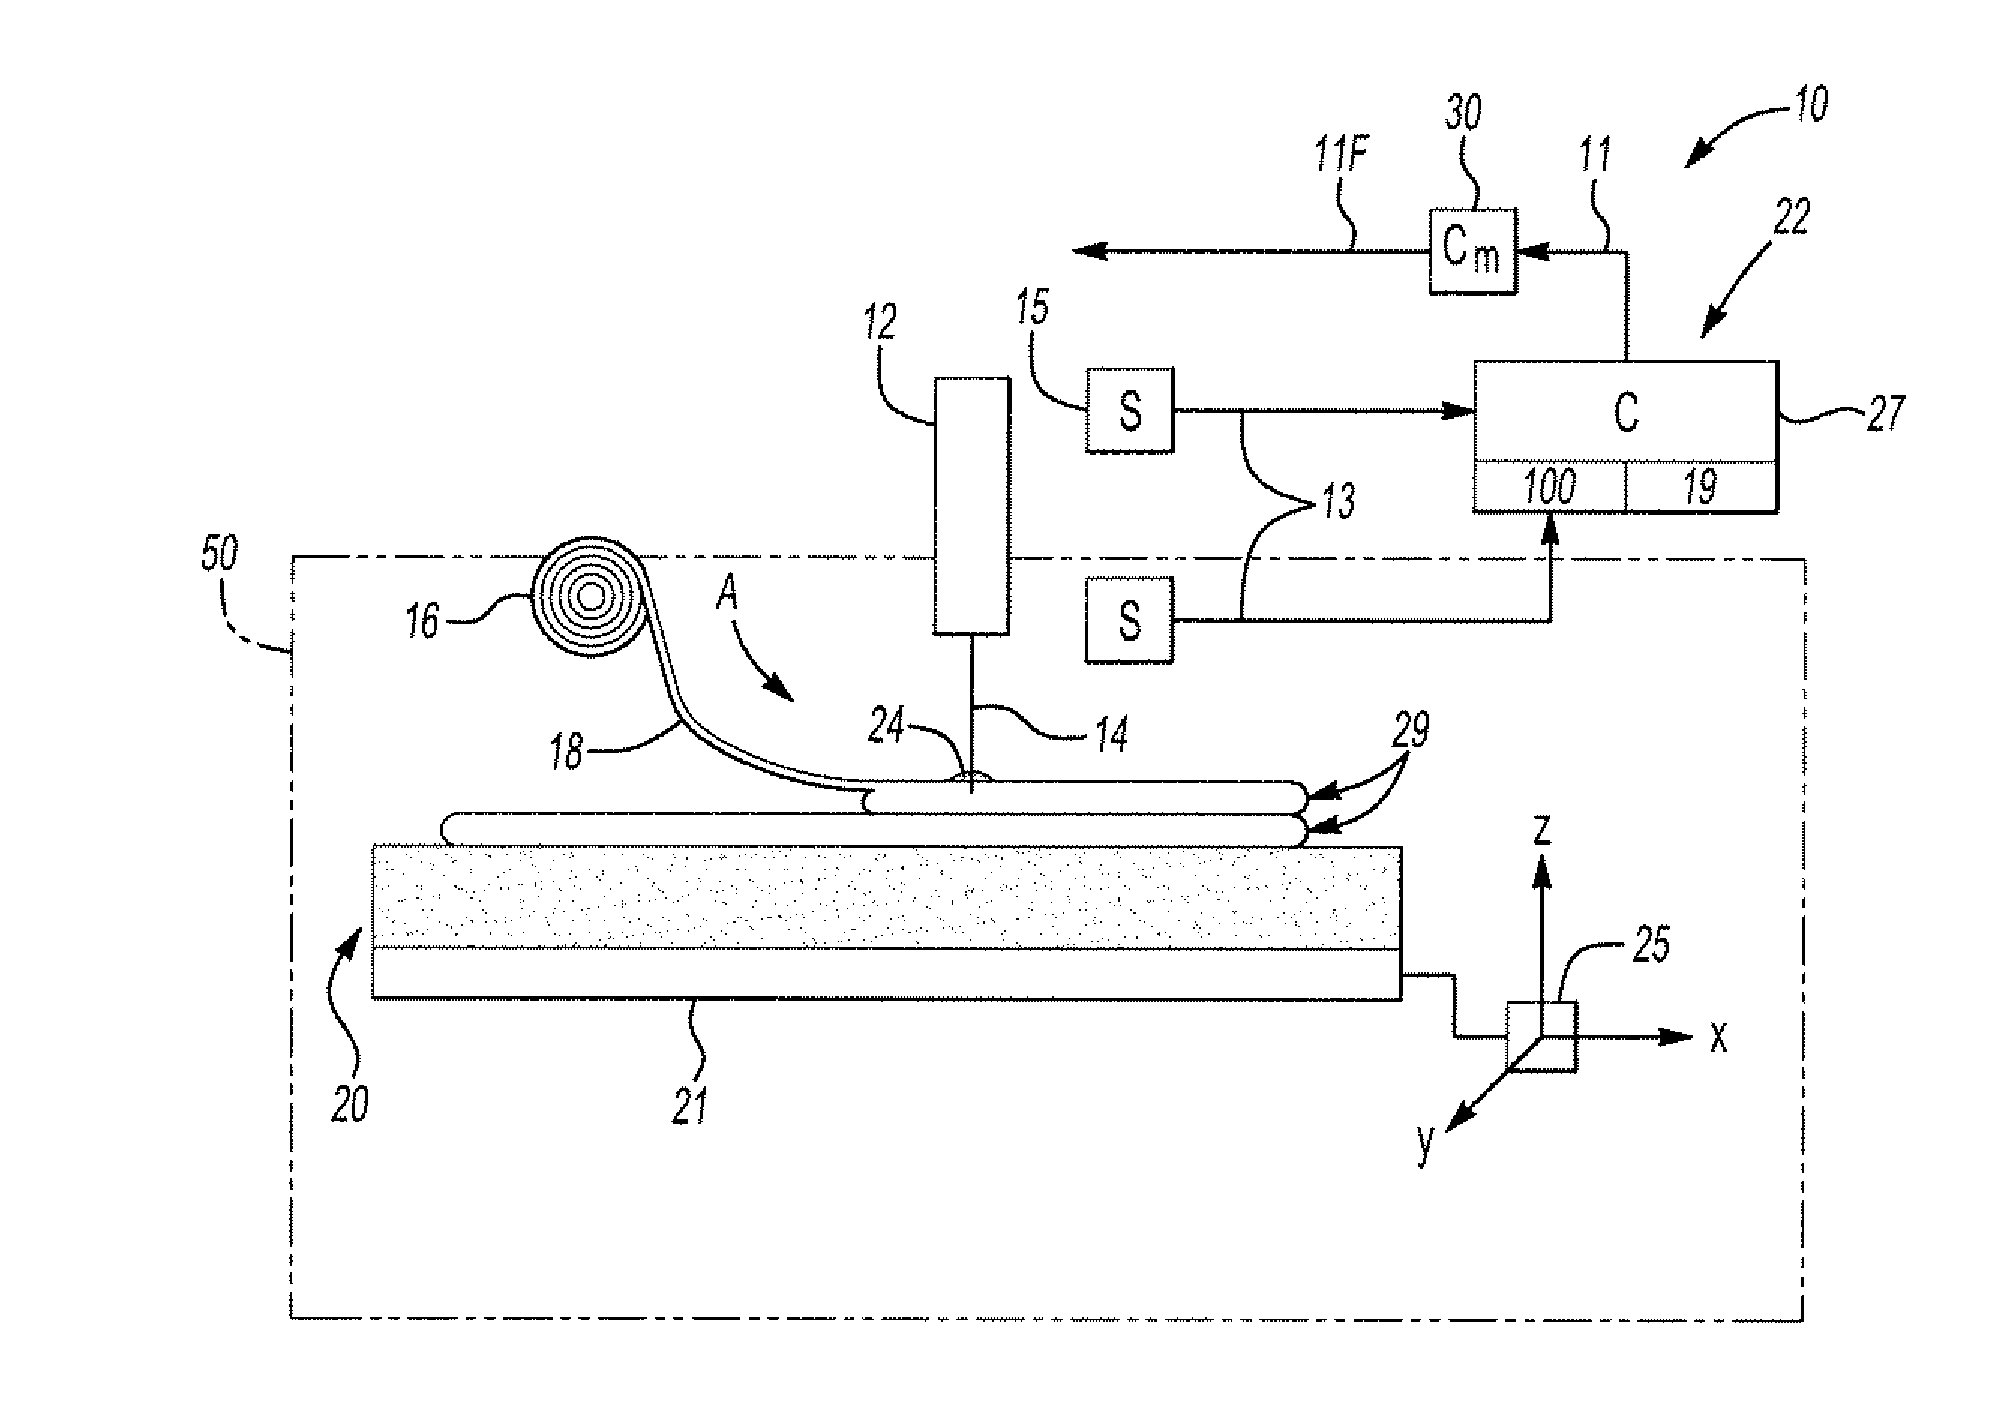 Closed-Loop Process Control for Electron Beam Freeform Fabrication and Deposition Processes